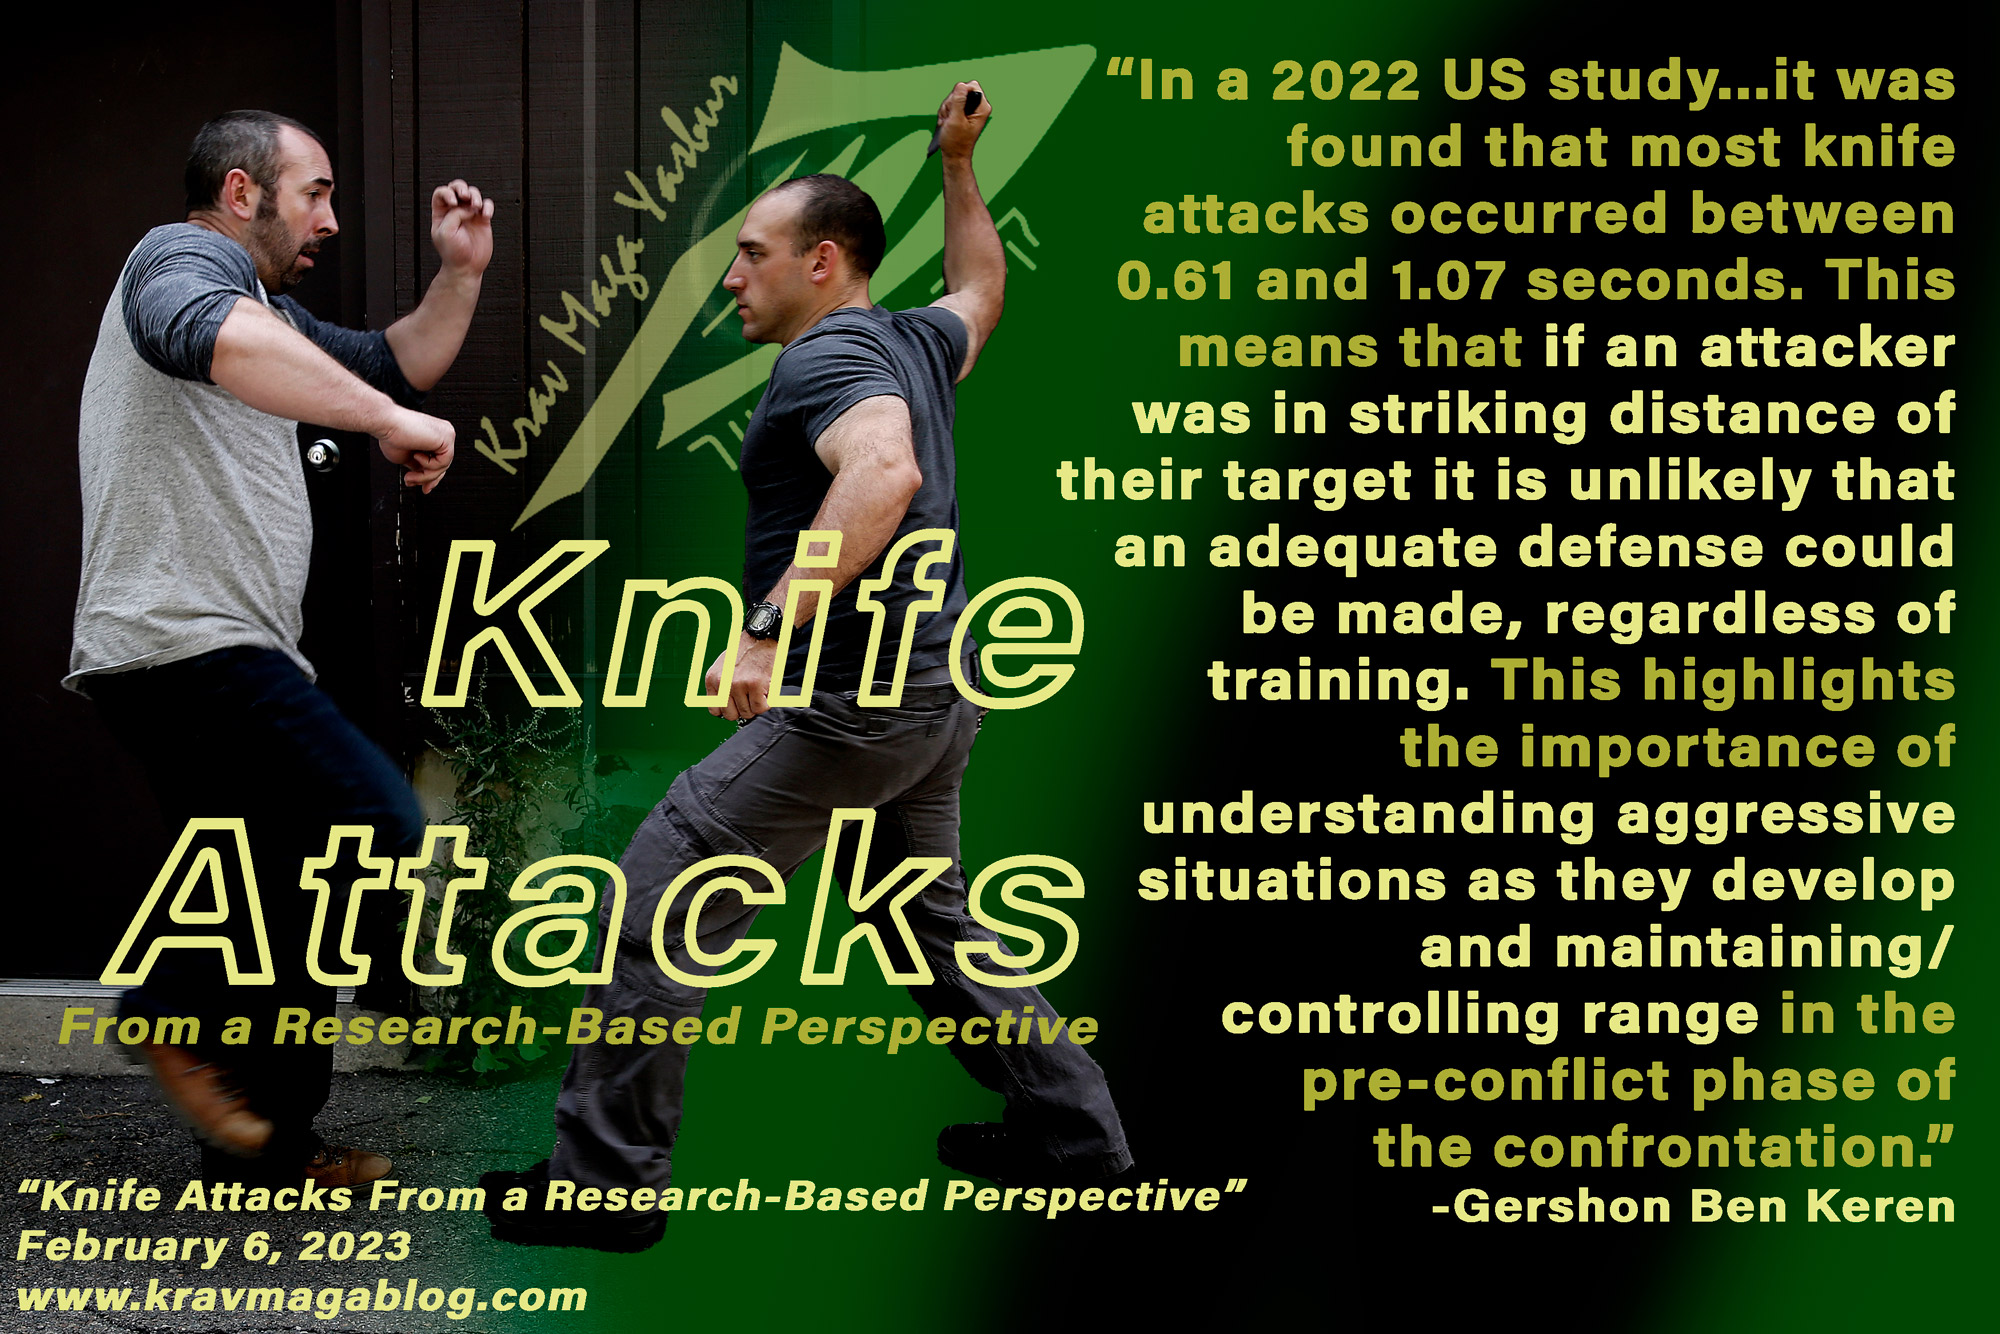 Looking At Knife Attacks From A Research-Based Perspective